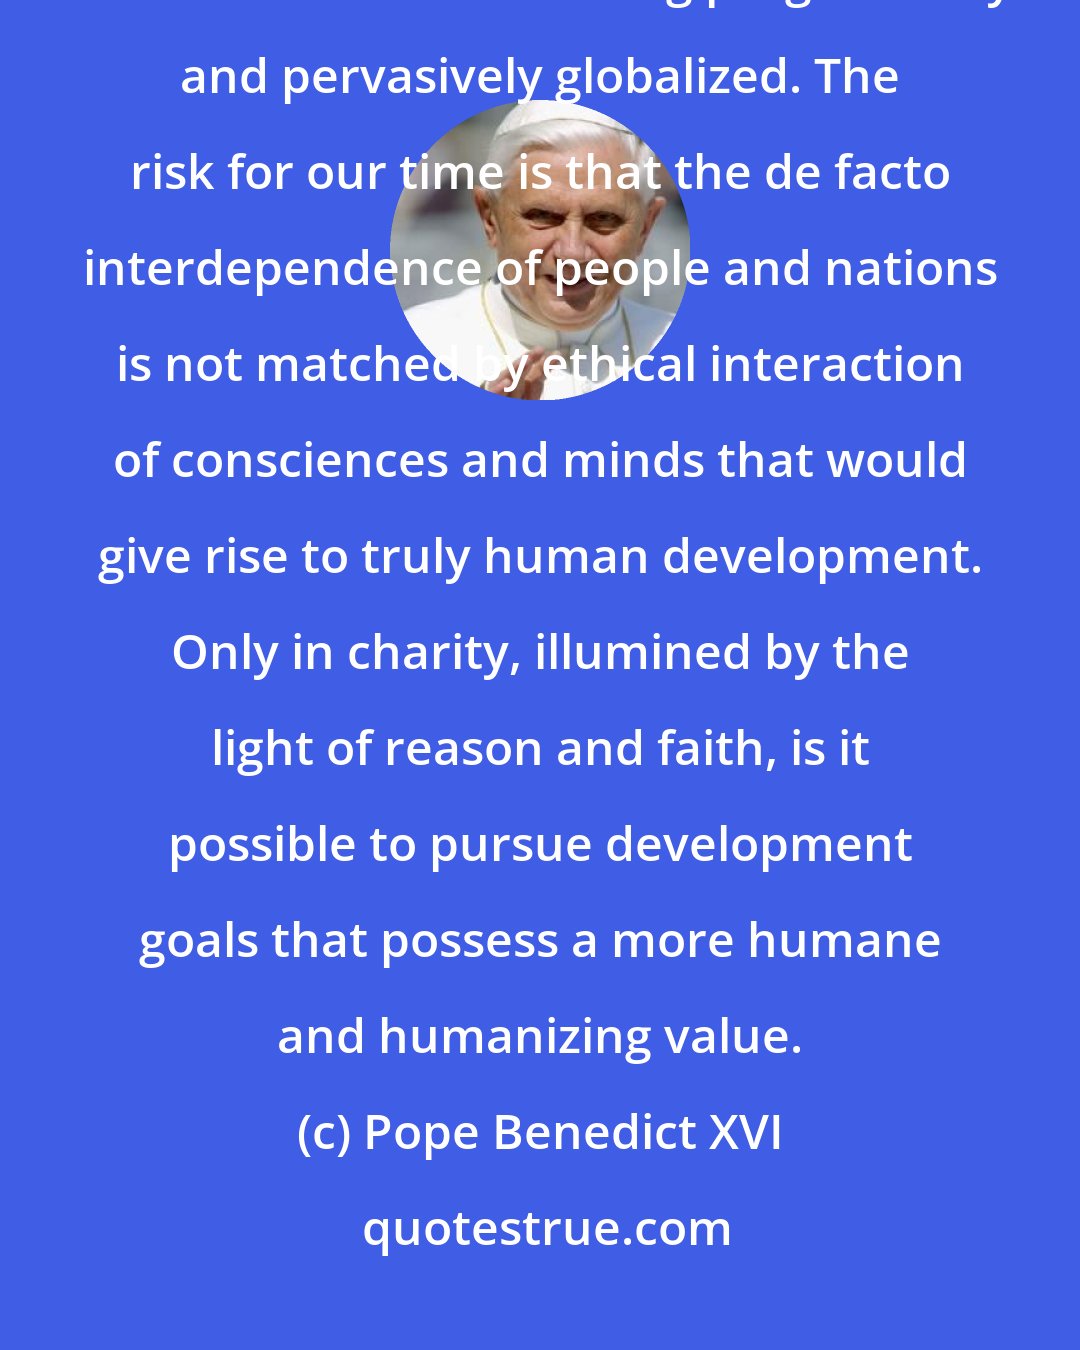 Pope Benedict XVI: Love in truth-caritas in veritate-is a great challenge for the Church in a world that is becoming progressively and pervasively globalized. The risk for our time is that the de facto interdependence of people and nations is not matched by ethical interaction of consciences and minds that would give rise to truly human development. Only in charity, illumined by the light of reason and faith, is it possible to pursue development goals that possess a more humane and humanizing value.